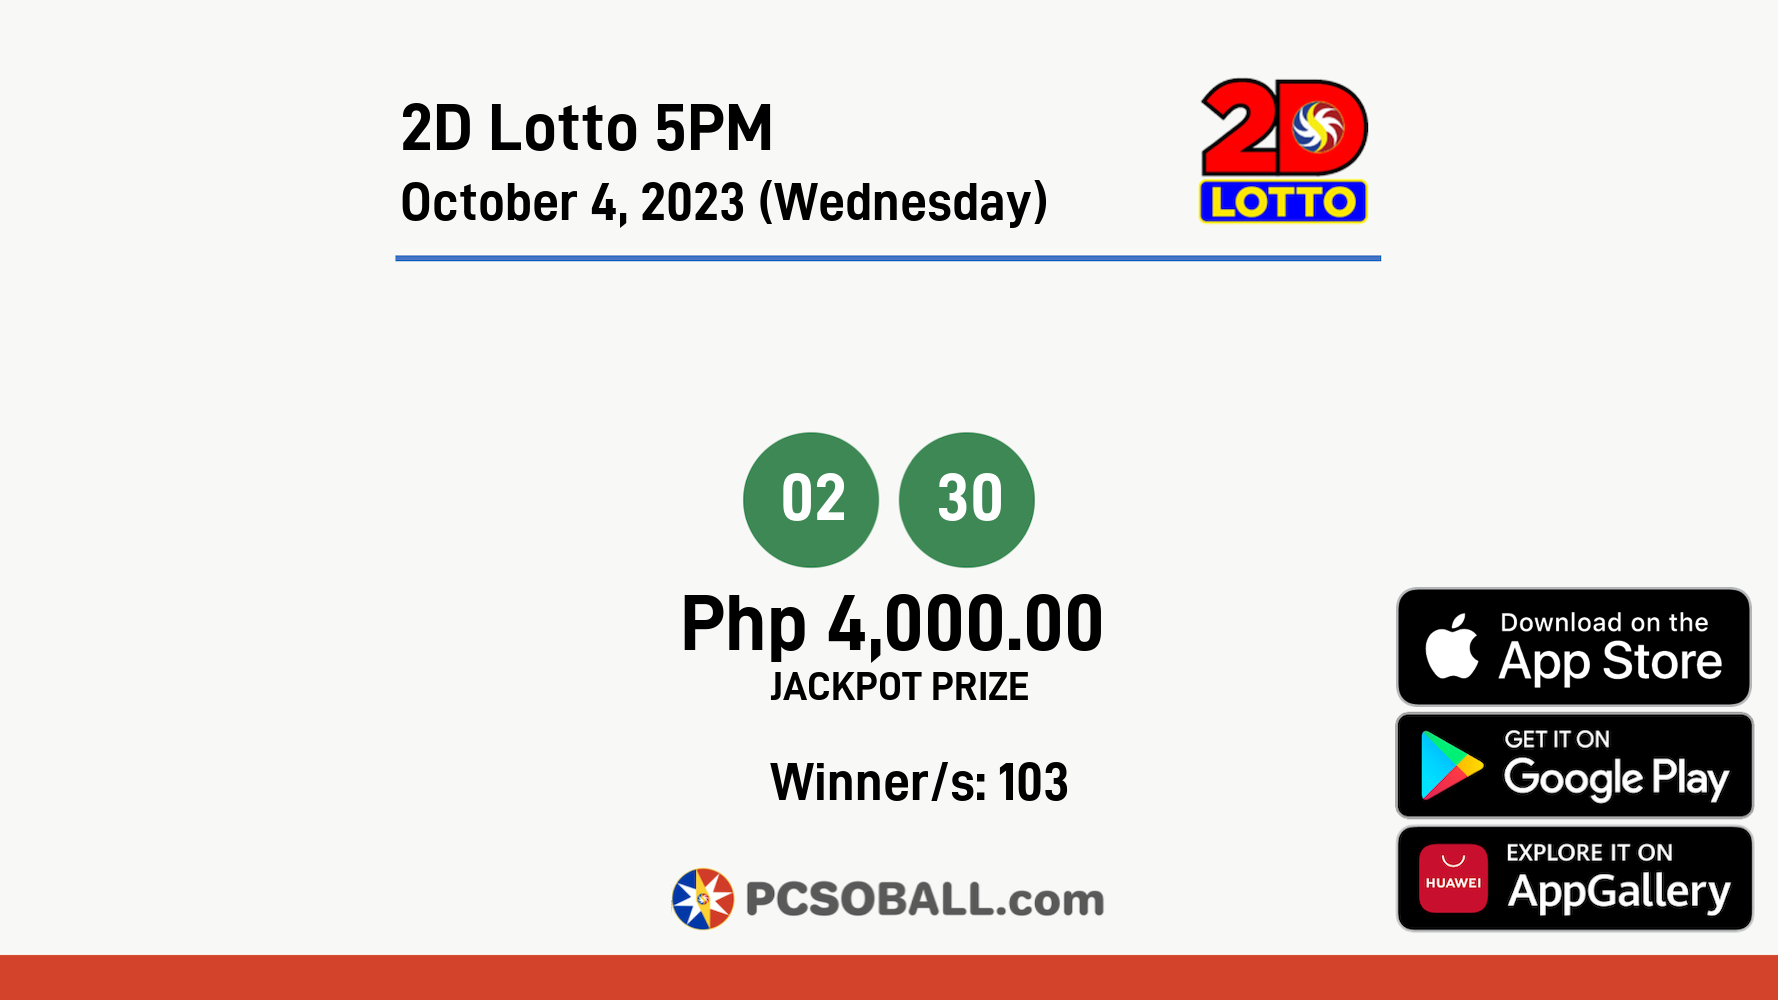 2D Lotto 5PM October 4, 2023 (Wednesday) Result